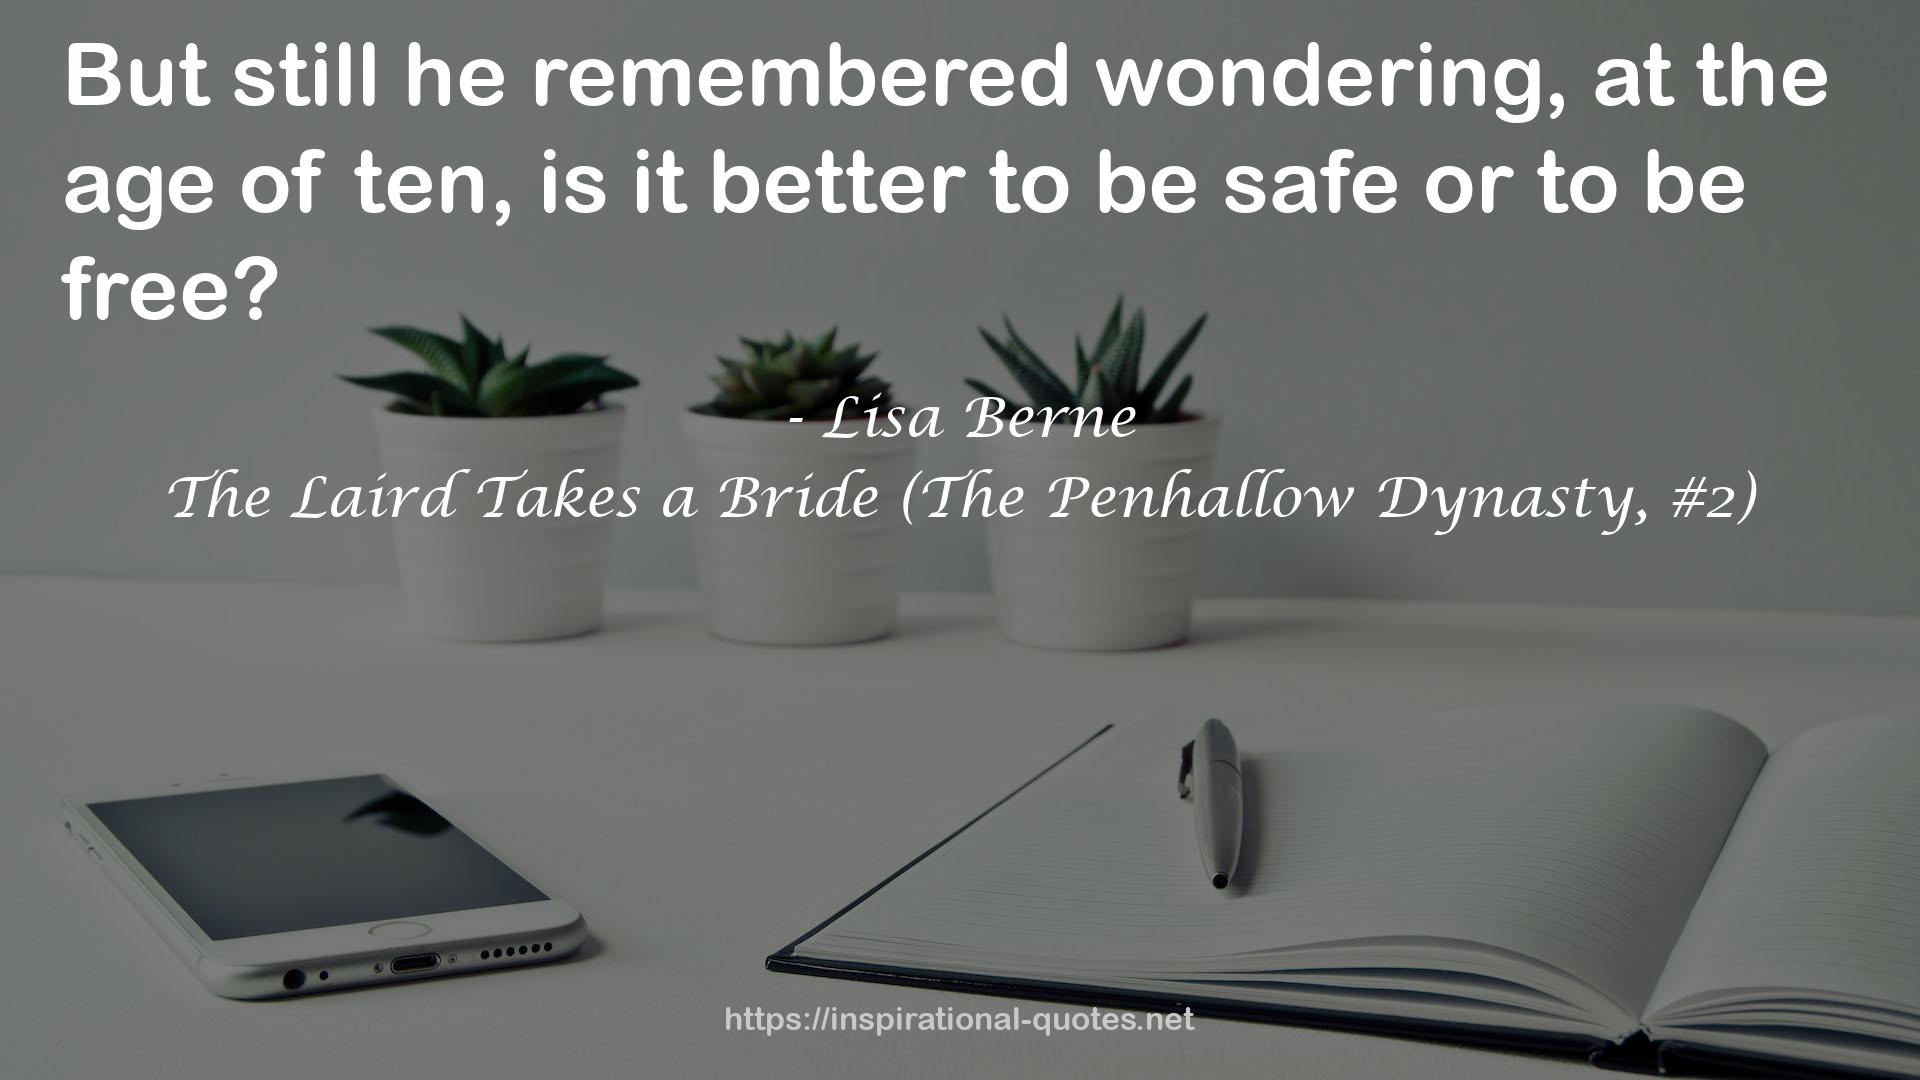 Lisa Berne QUOTES